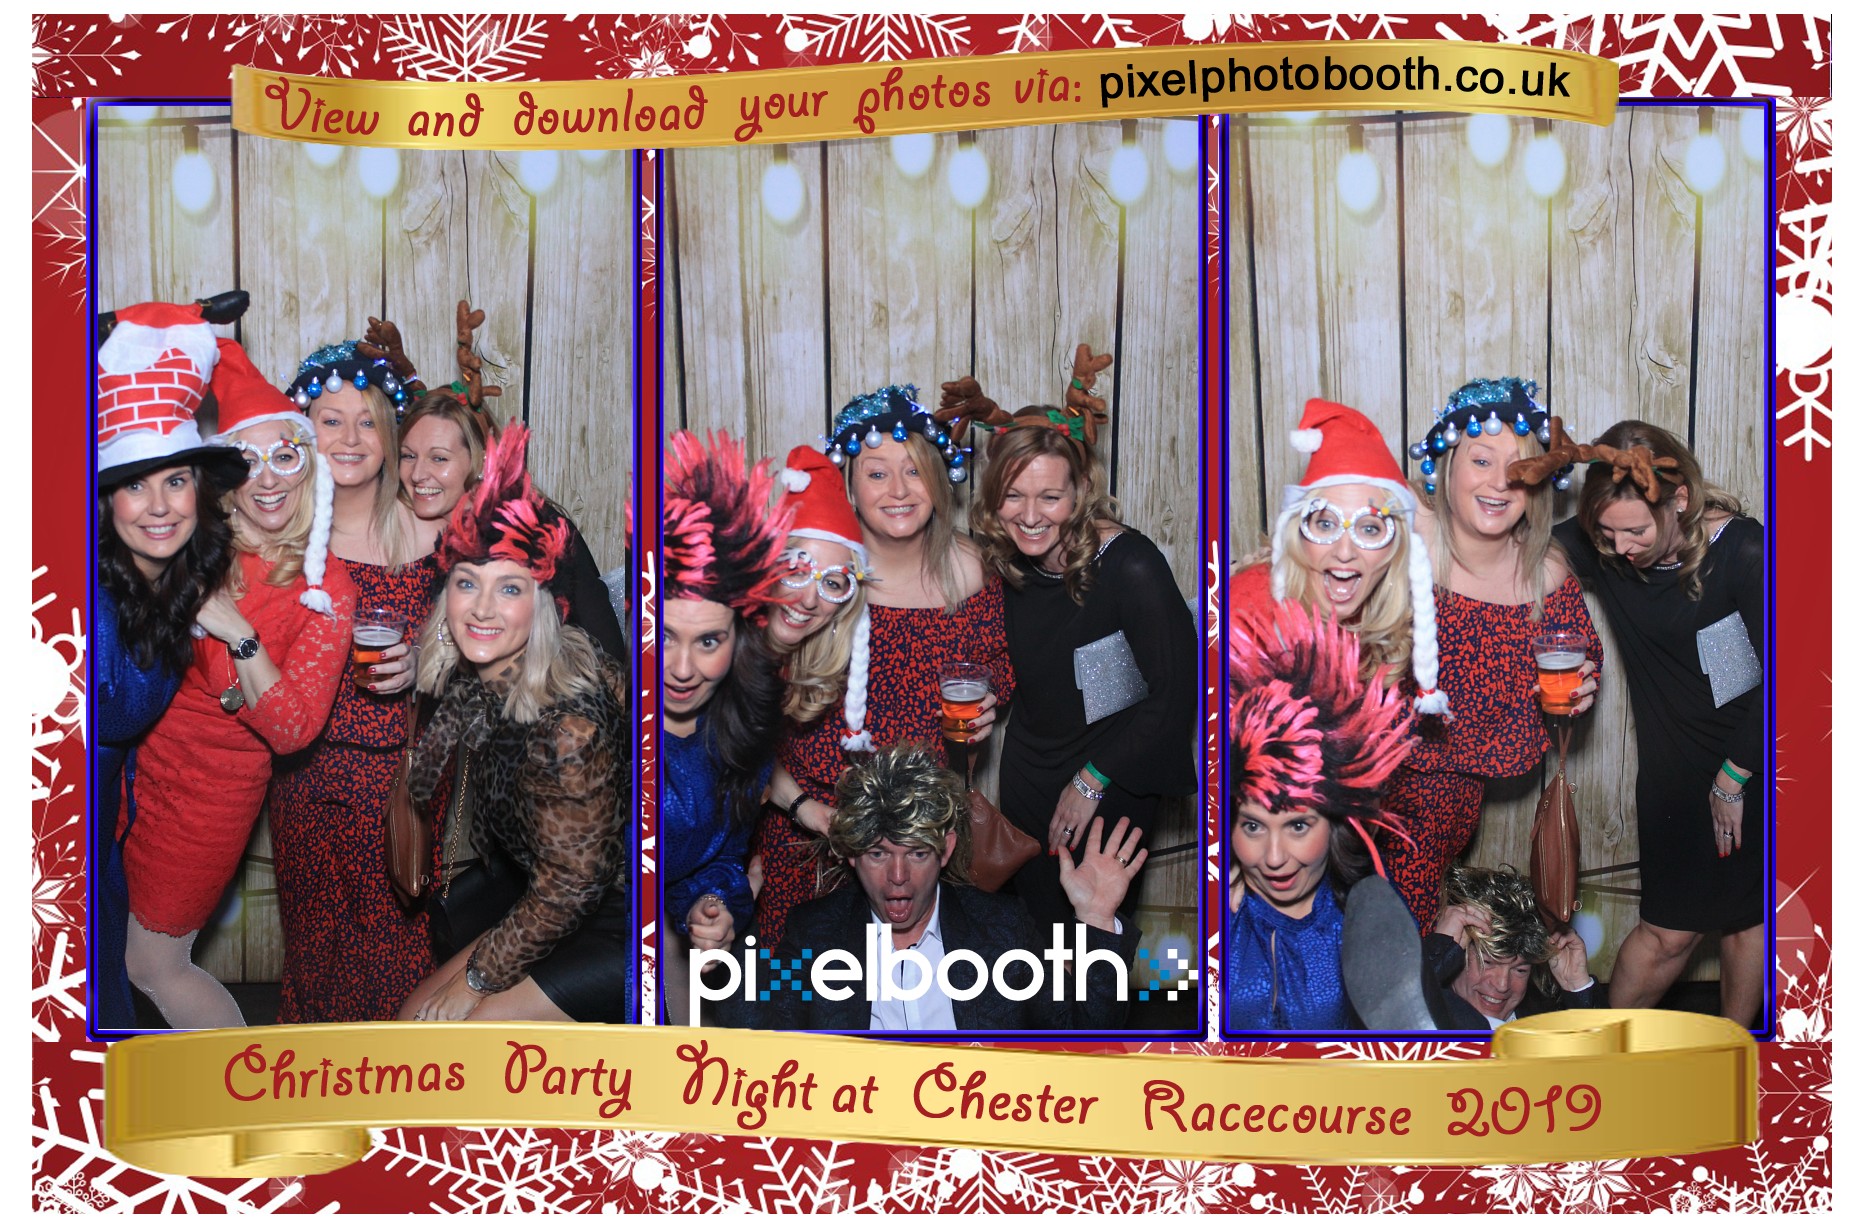 13th Dec 2019: Chester Racecourse Christmas Party Night